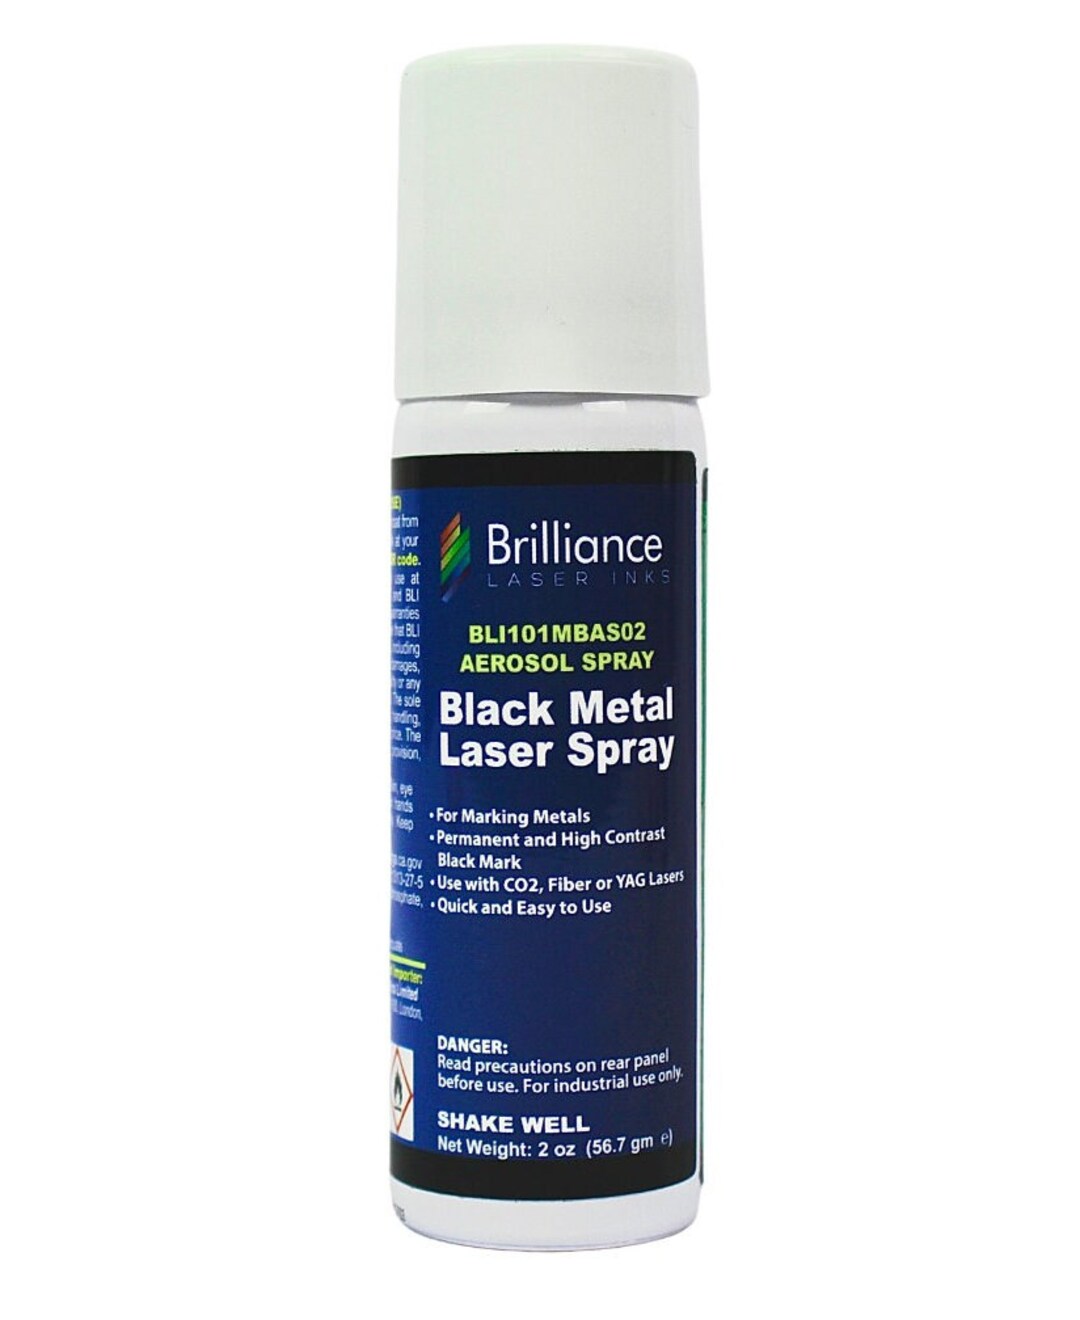 New marking sprays for laser engraving metals, glass and ceramics.